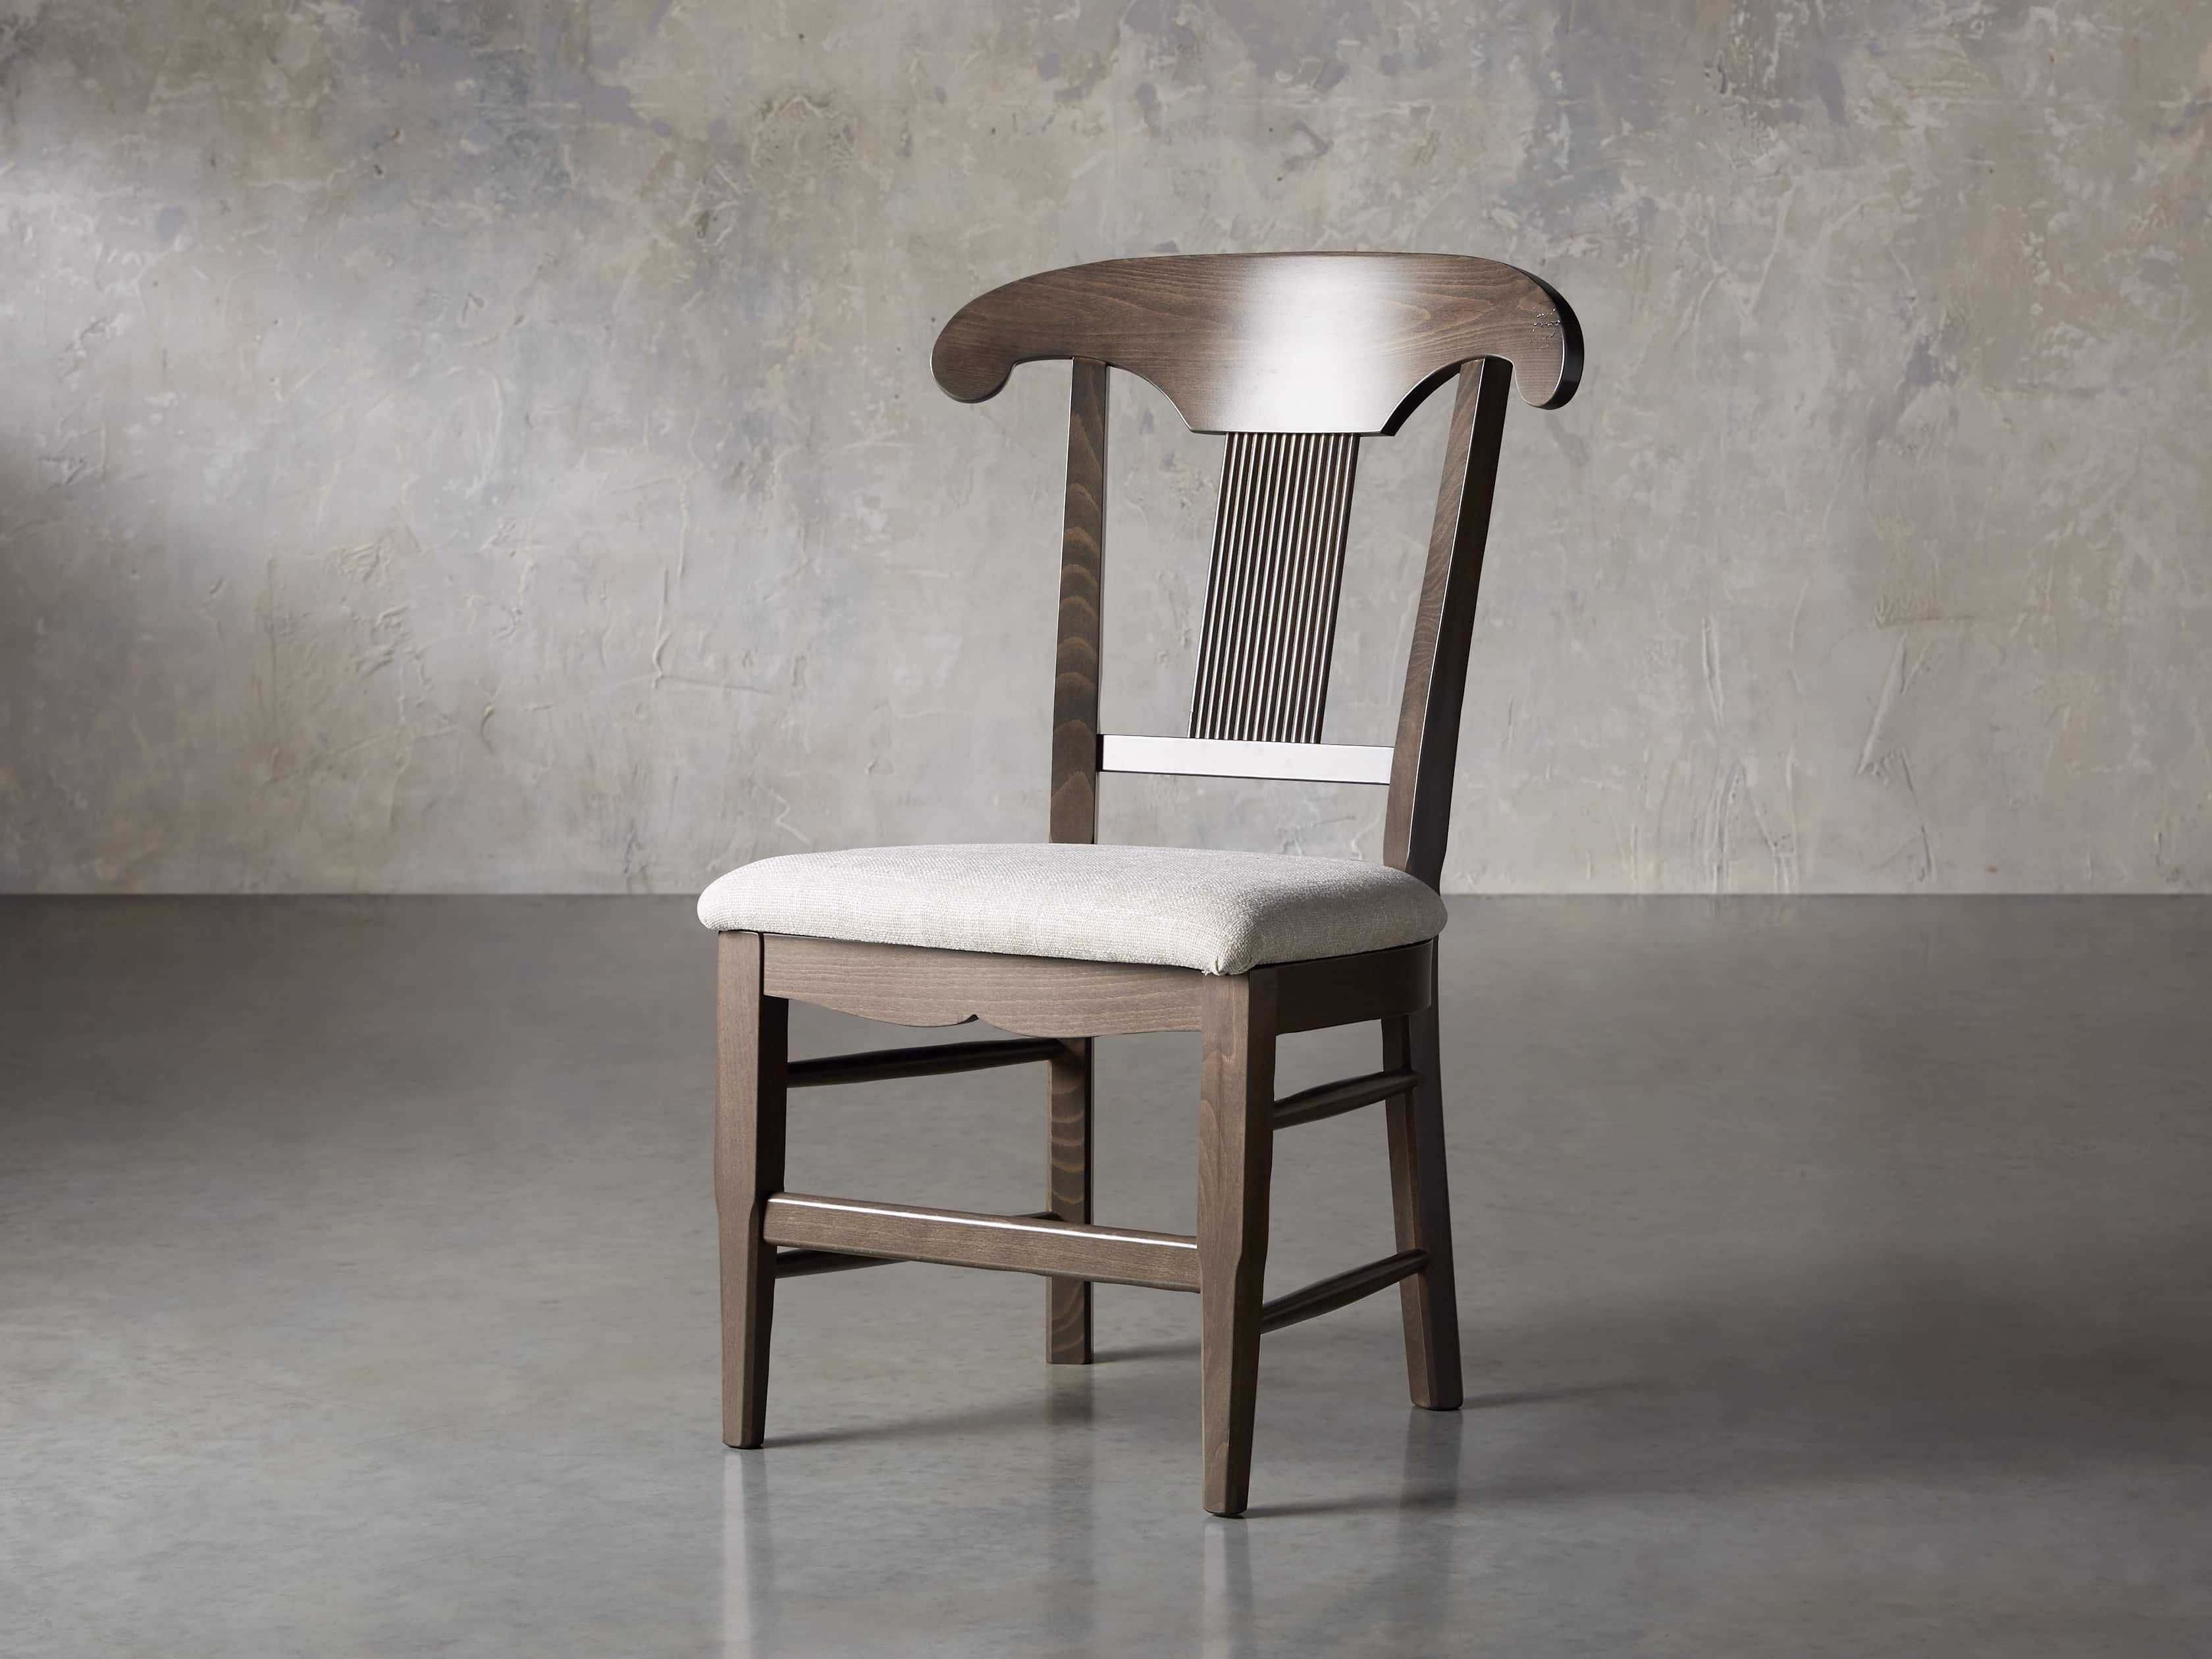 Tuscany Dining Side Chair in Porfido | Arhaus